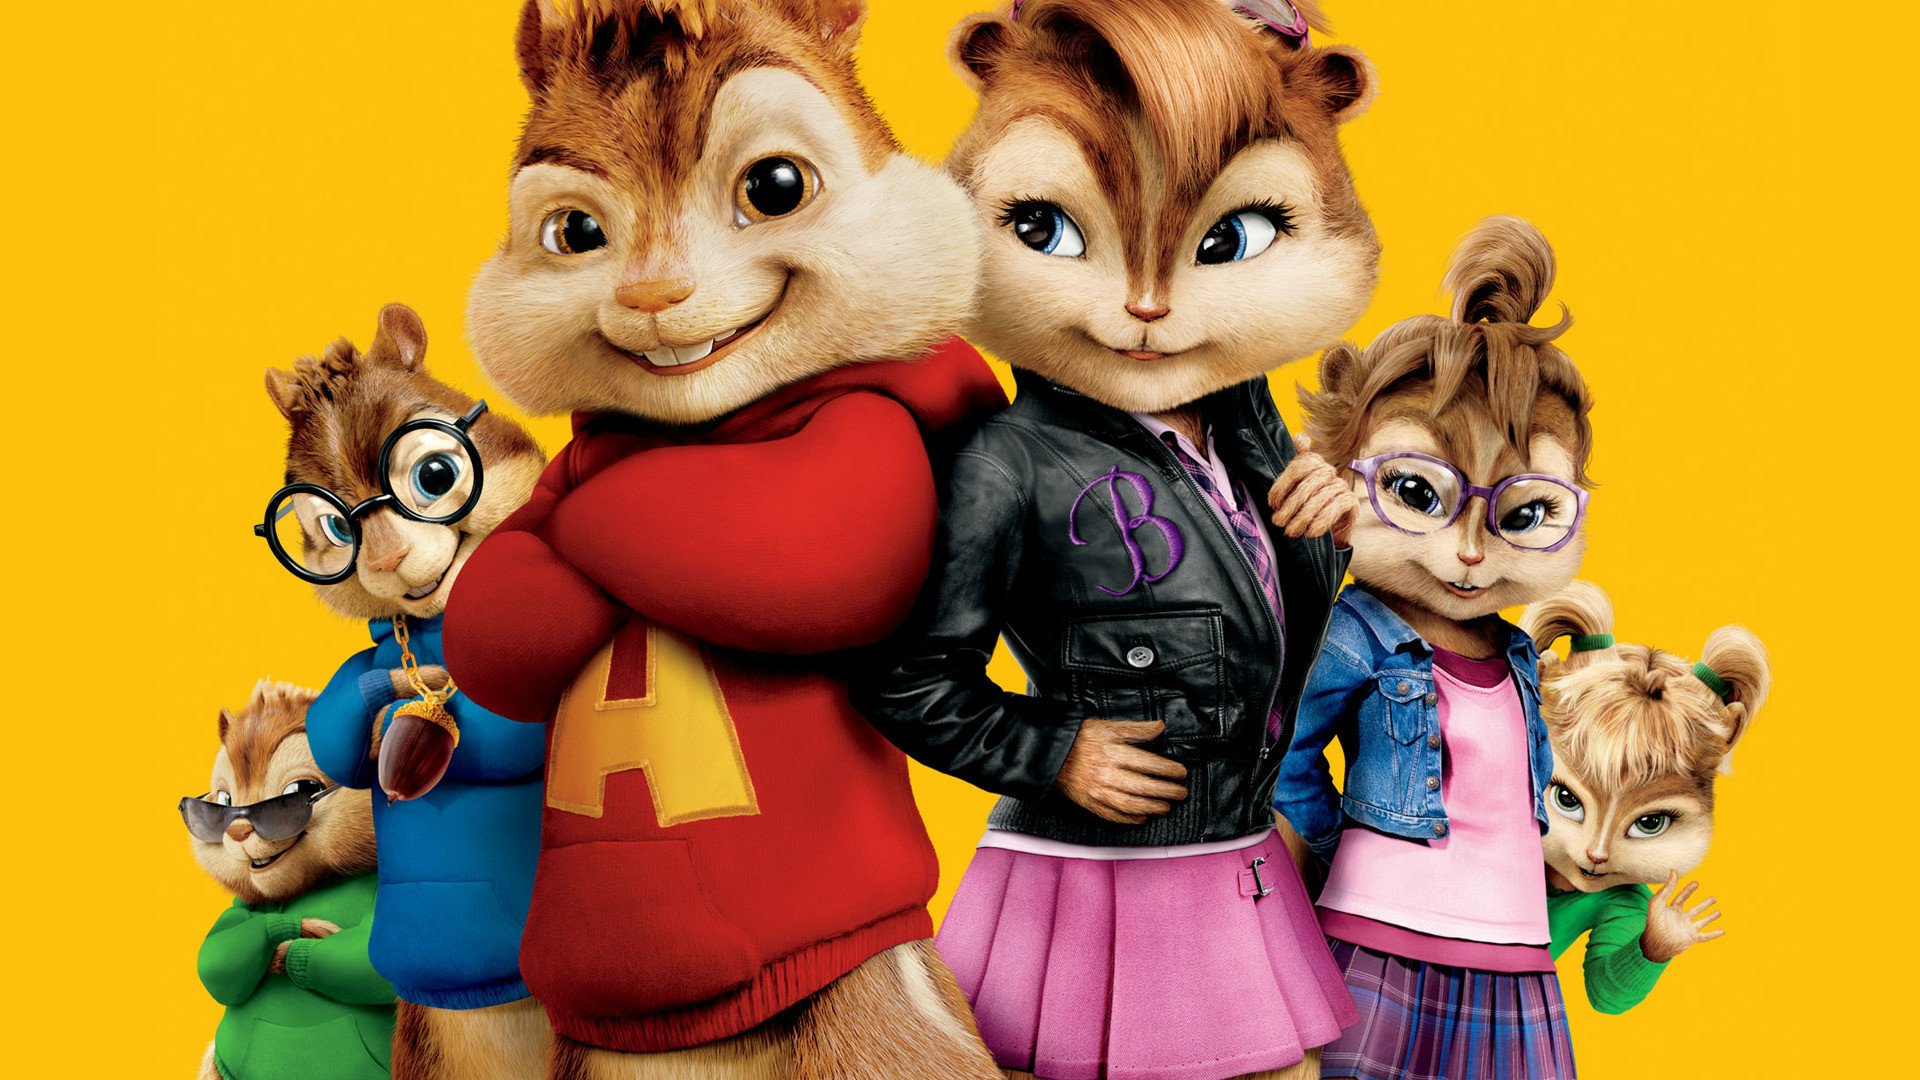 Alvin and the Chipmunks: The Squeakquel 高 清 壁 纸, 桌 面 背 景.